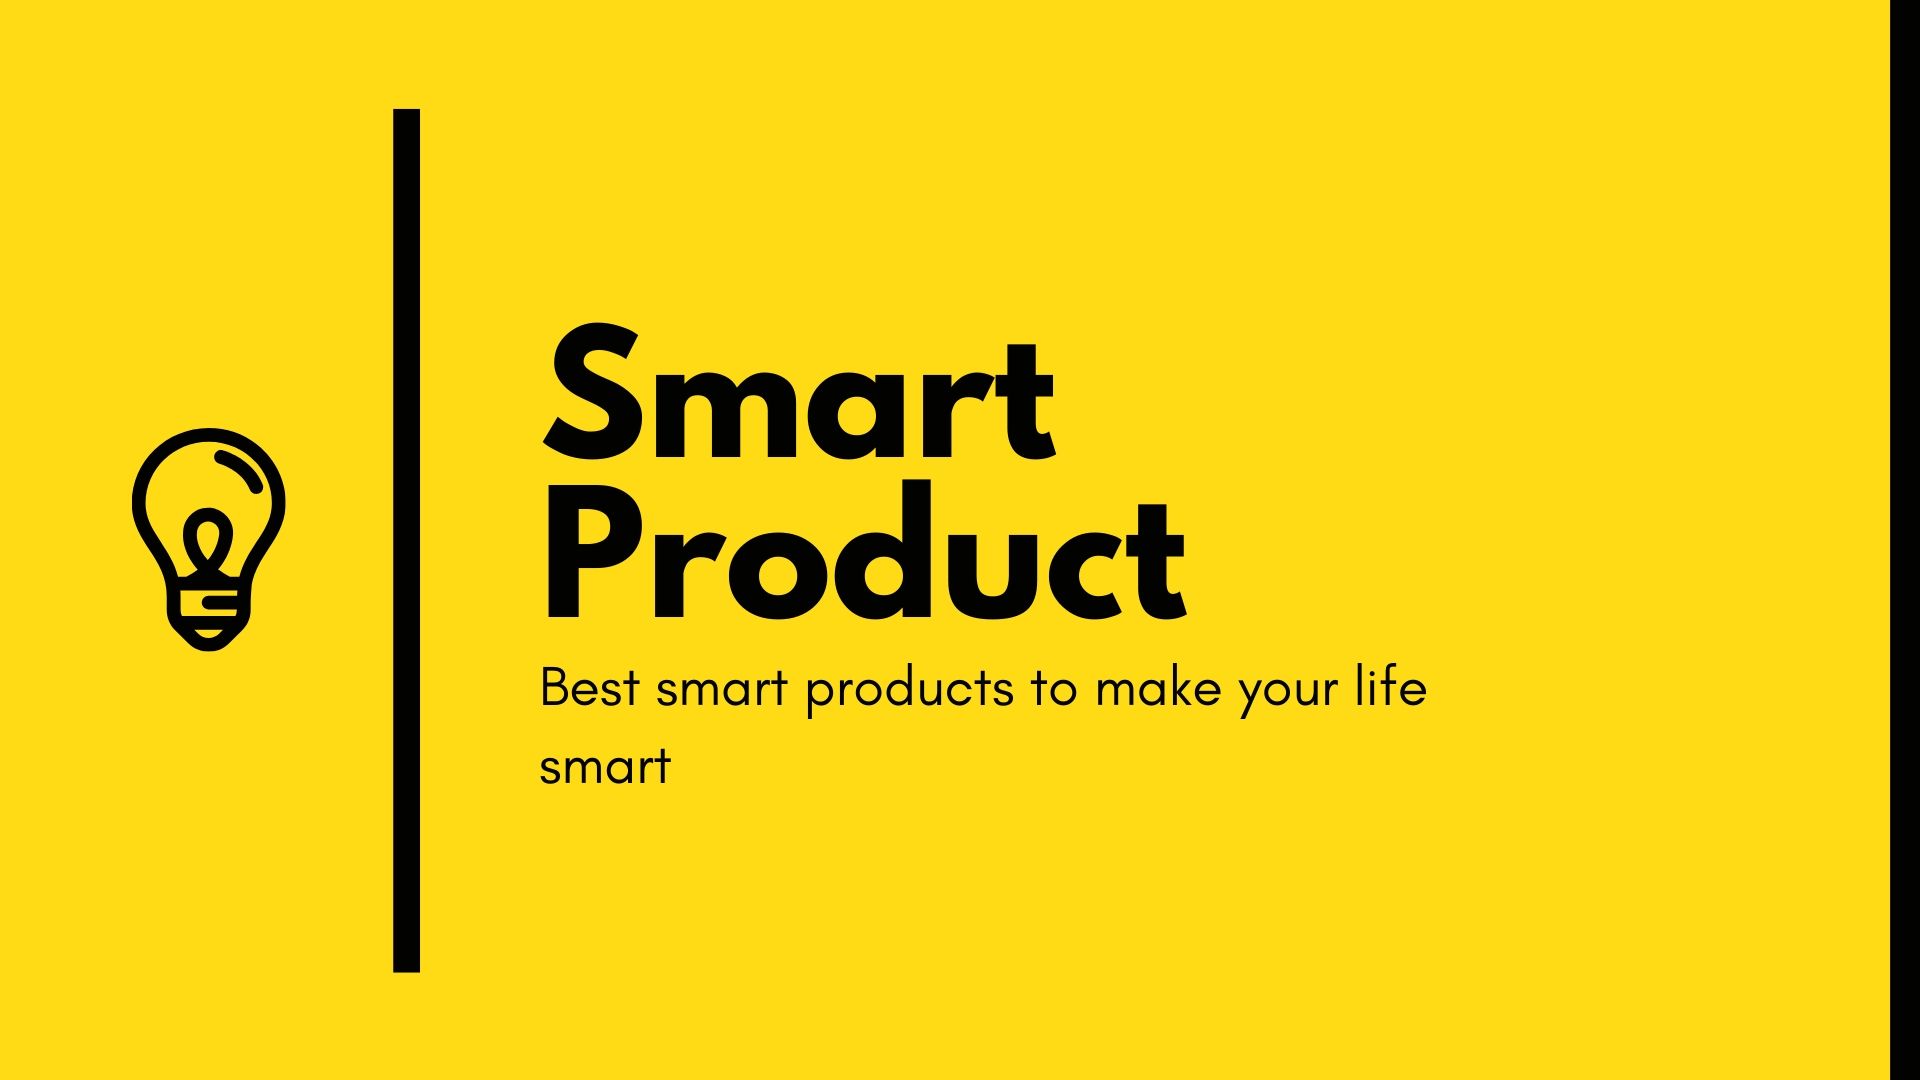 Best Smart Product for home to live in a smart way